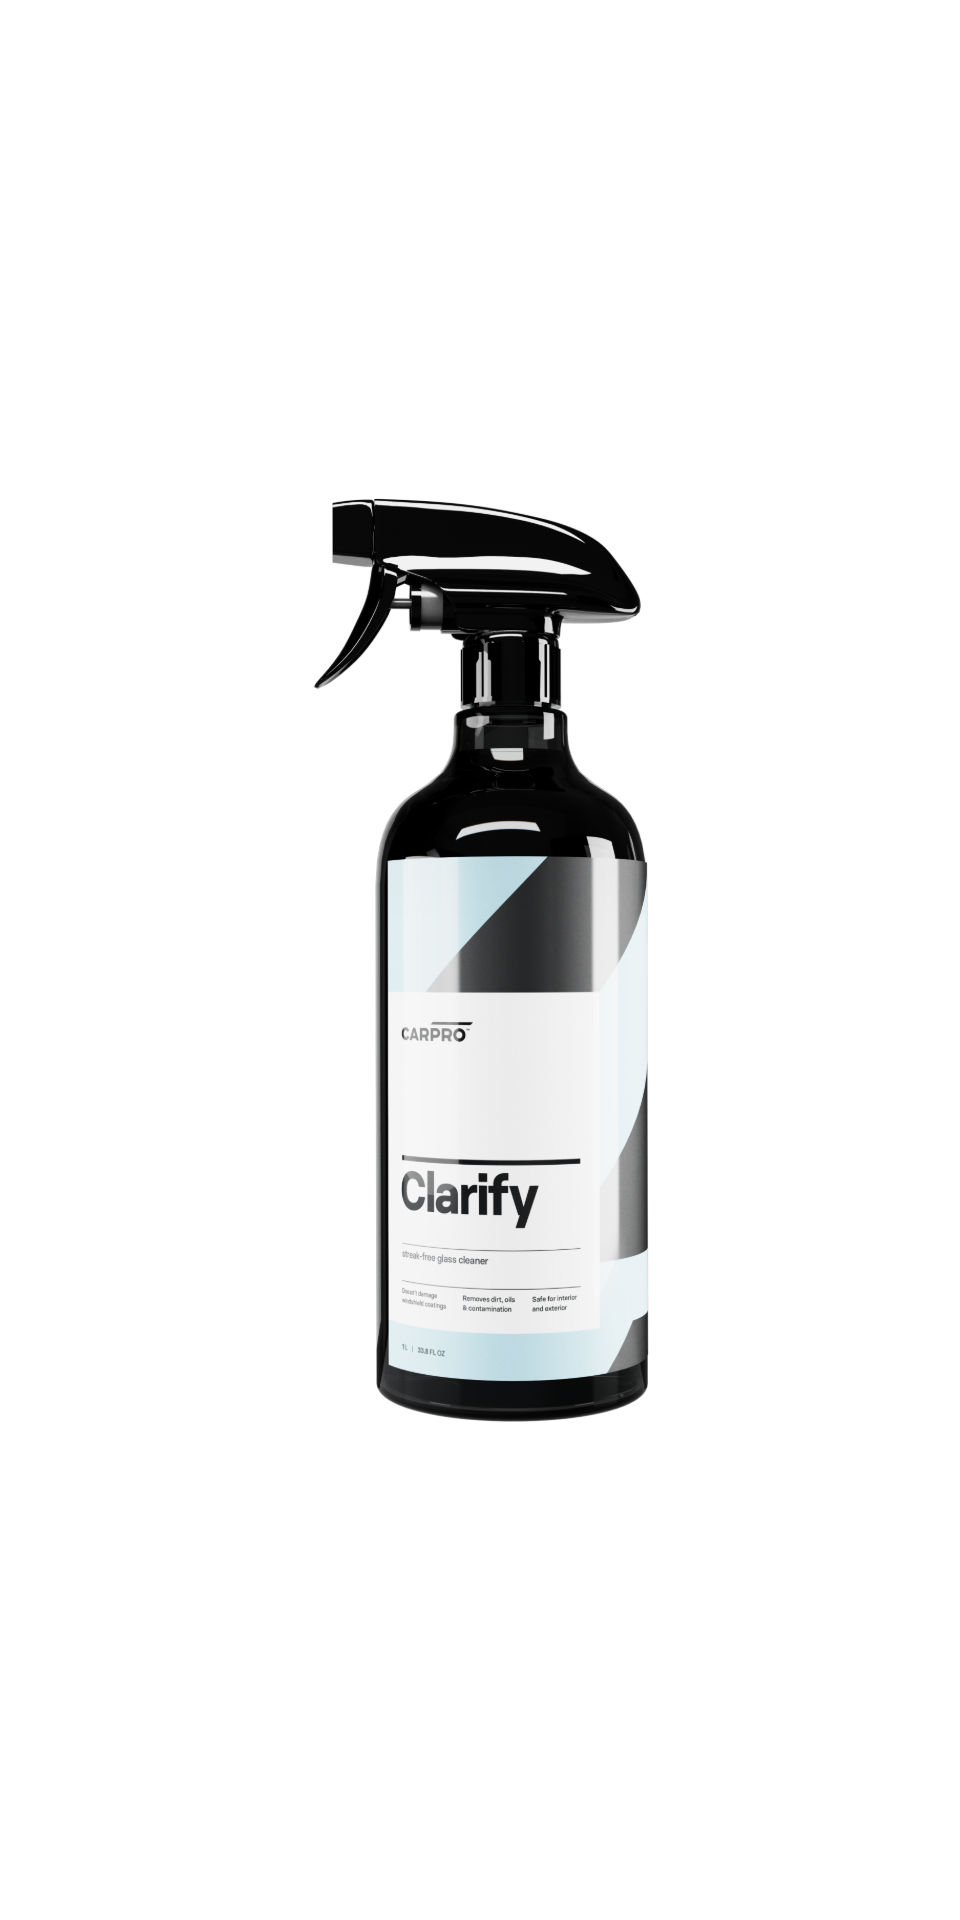 ClariFy glass cleaner